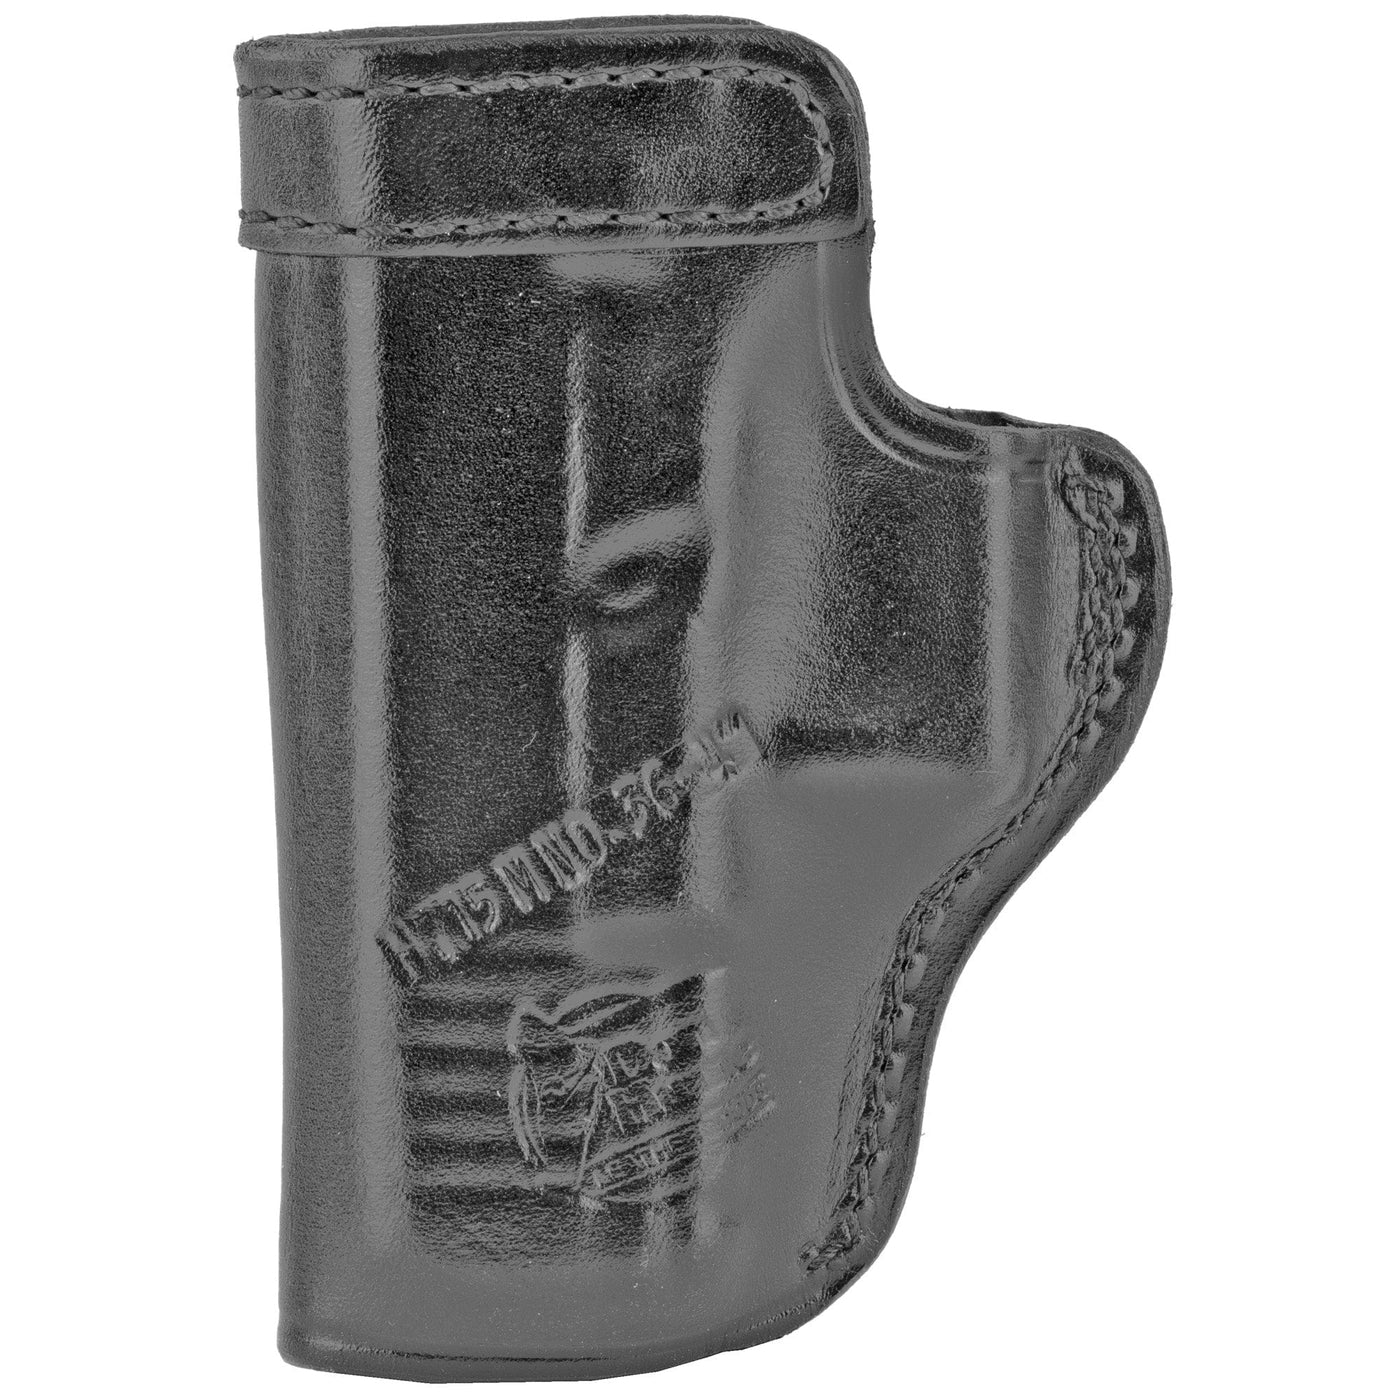 Don Hume D Hume H715-m For Glk 19/23 Blk Rh Holsters